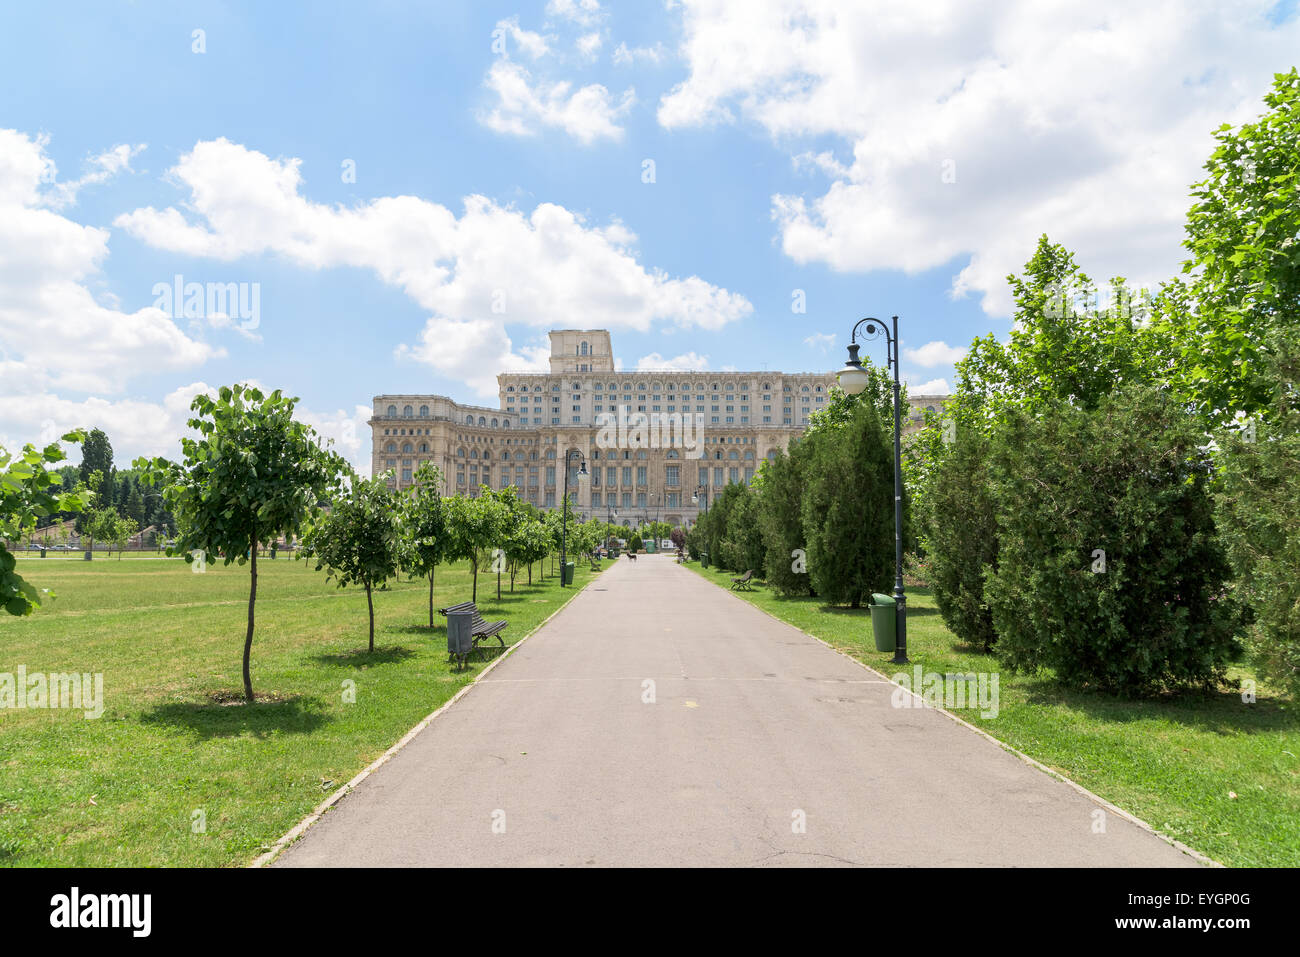 The Public Park Izvor In Bucharest Was Built In 1985 And Is Located Right Next To The Parliament Palace (Casa Poporului). Stock Photo